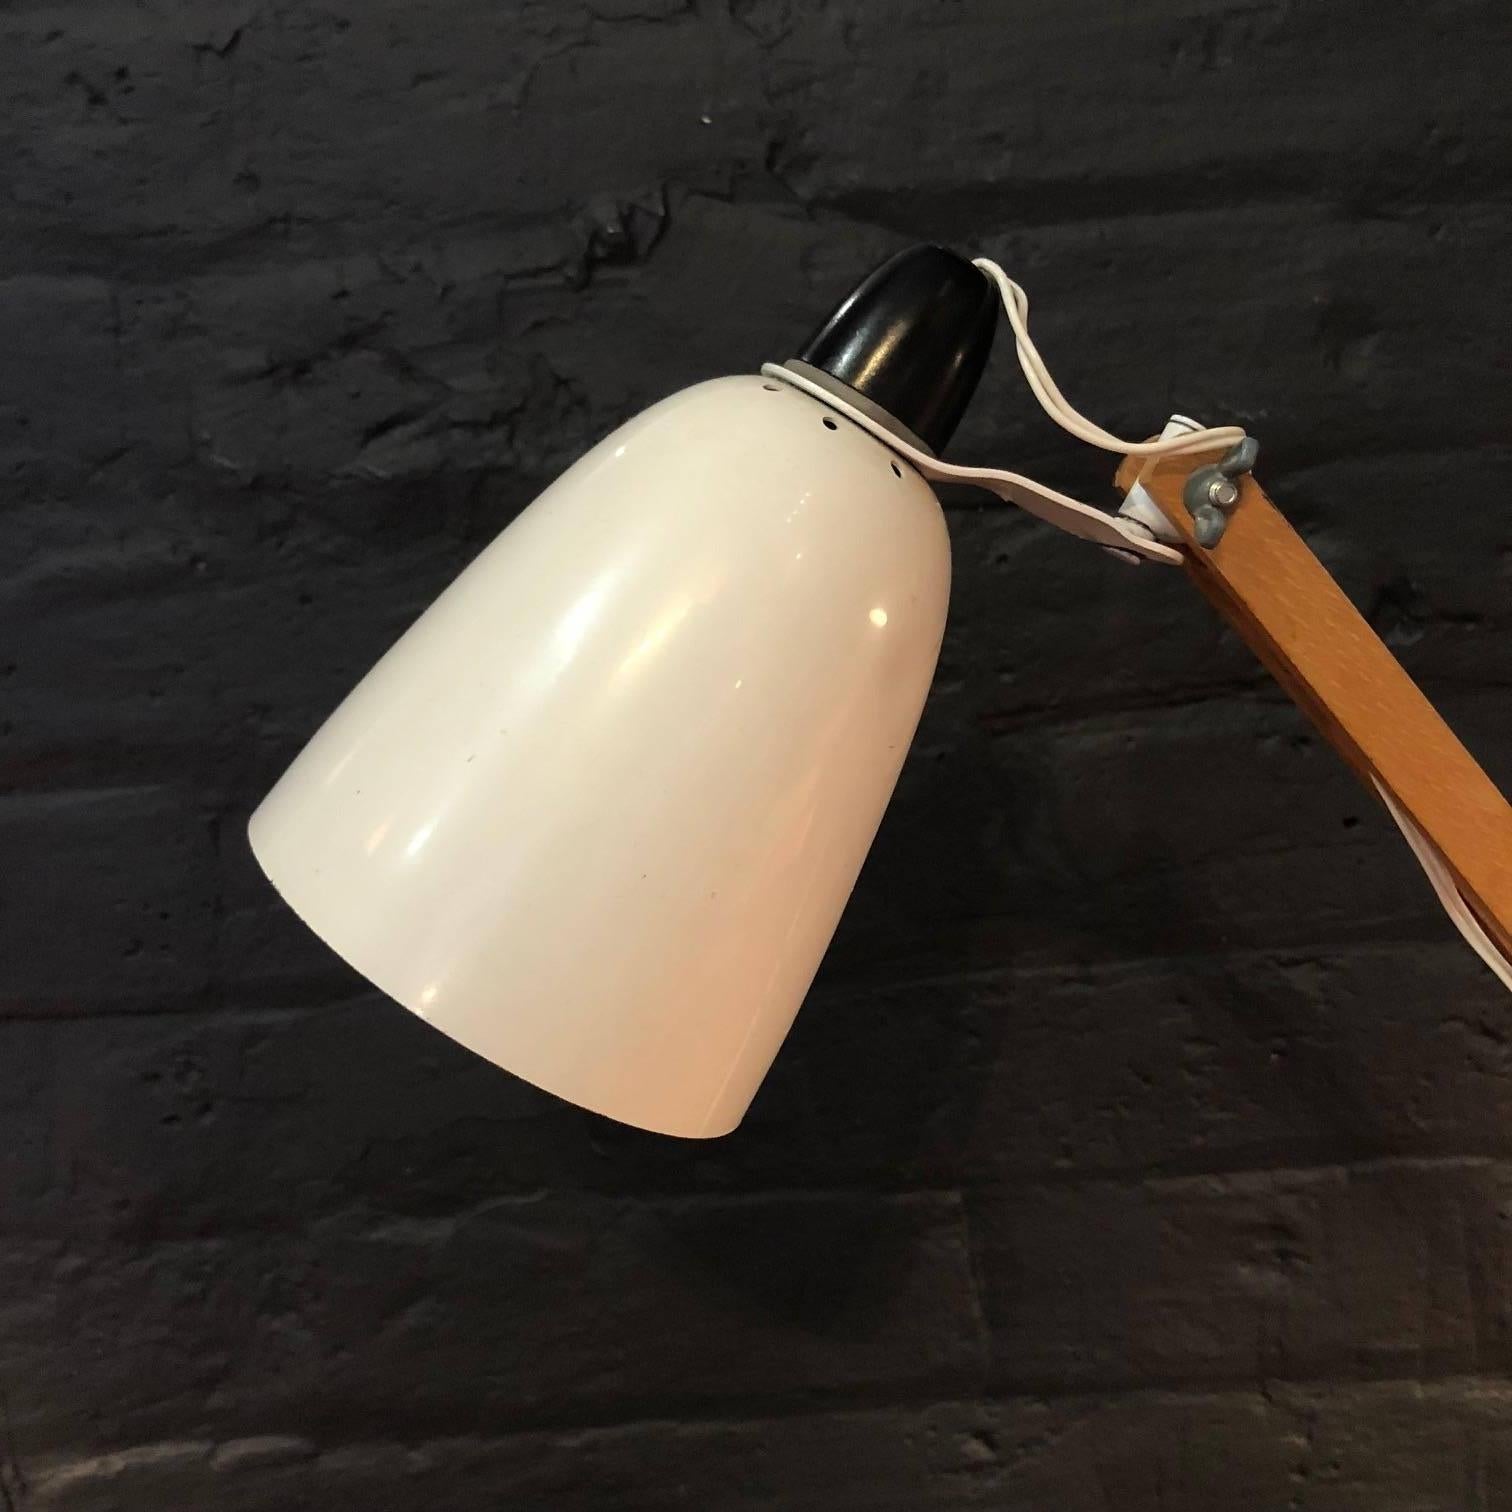 English Vintage Midcentury Maclamp Anglepoise Lamp in White Designed by Terence Conran